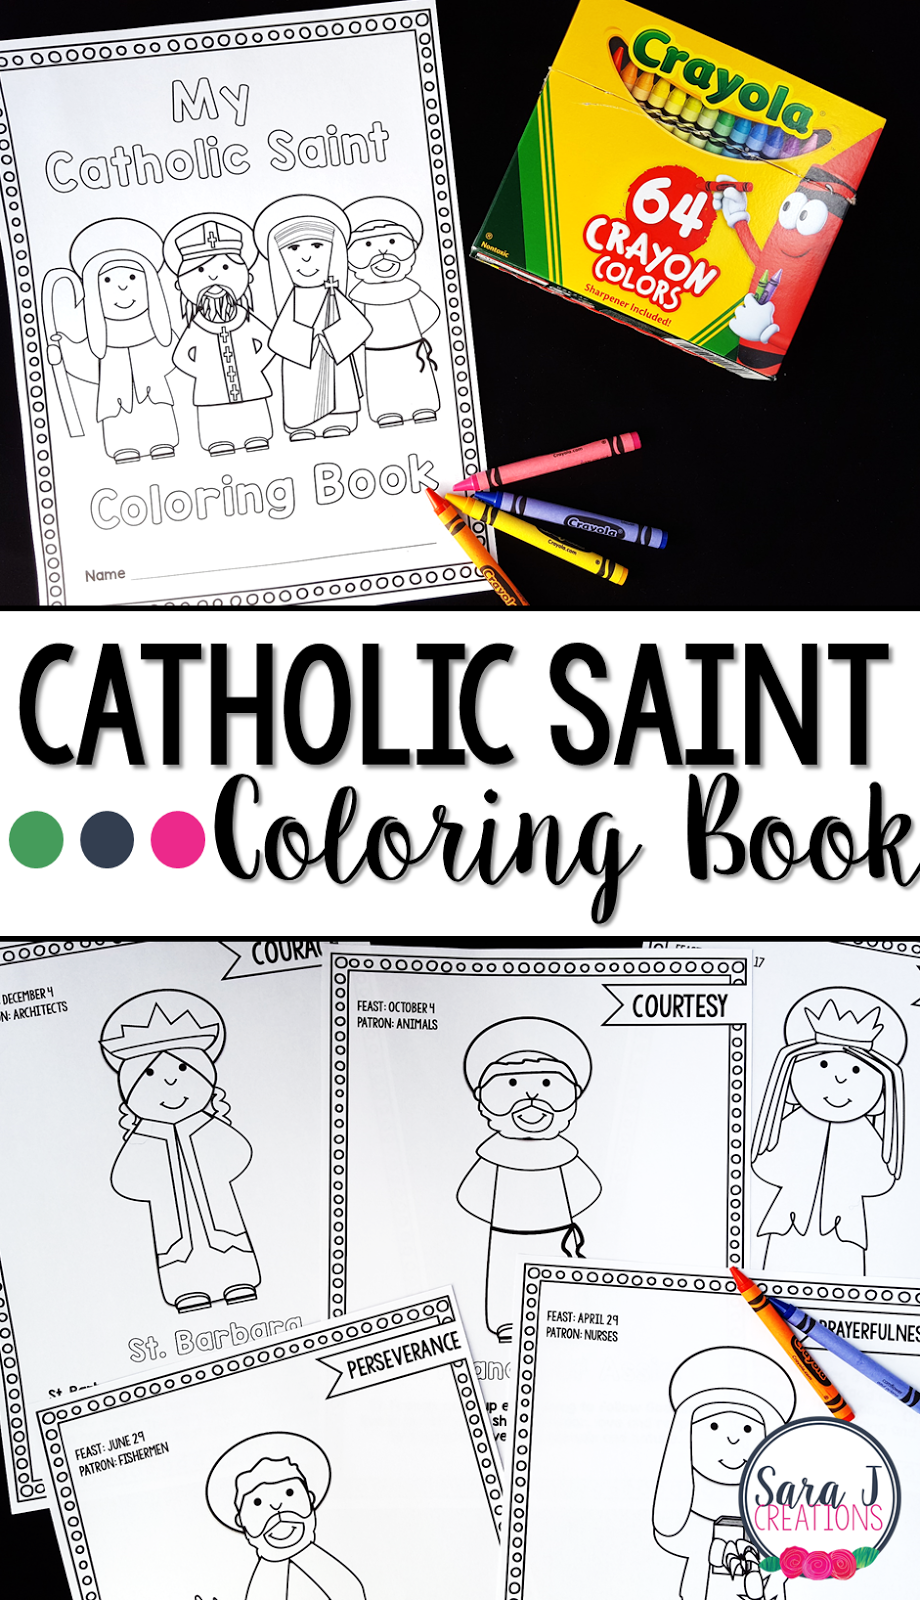 A Catholic Saints Coloring Book is an EASY way for kids to learn about the lives of the Saints.